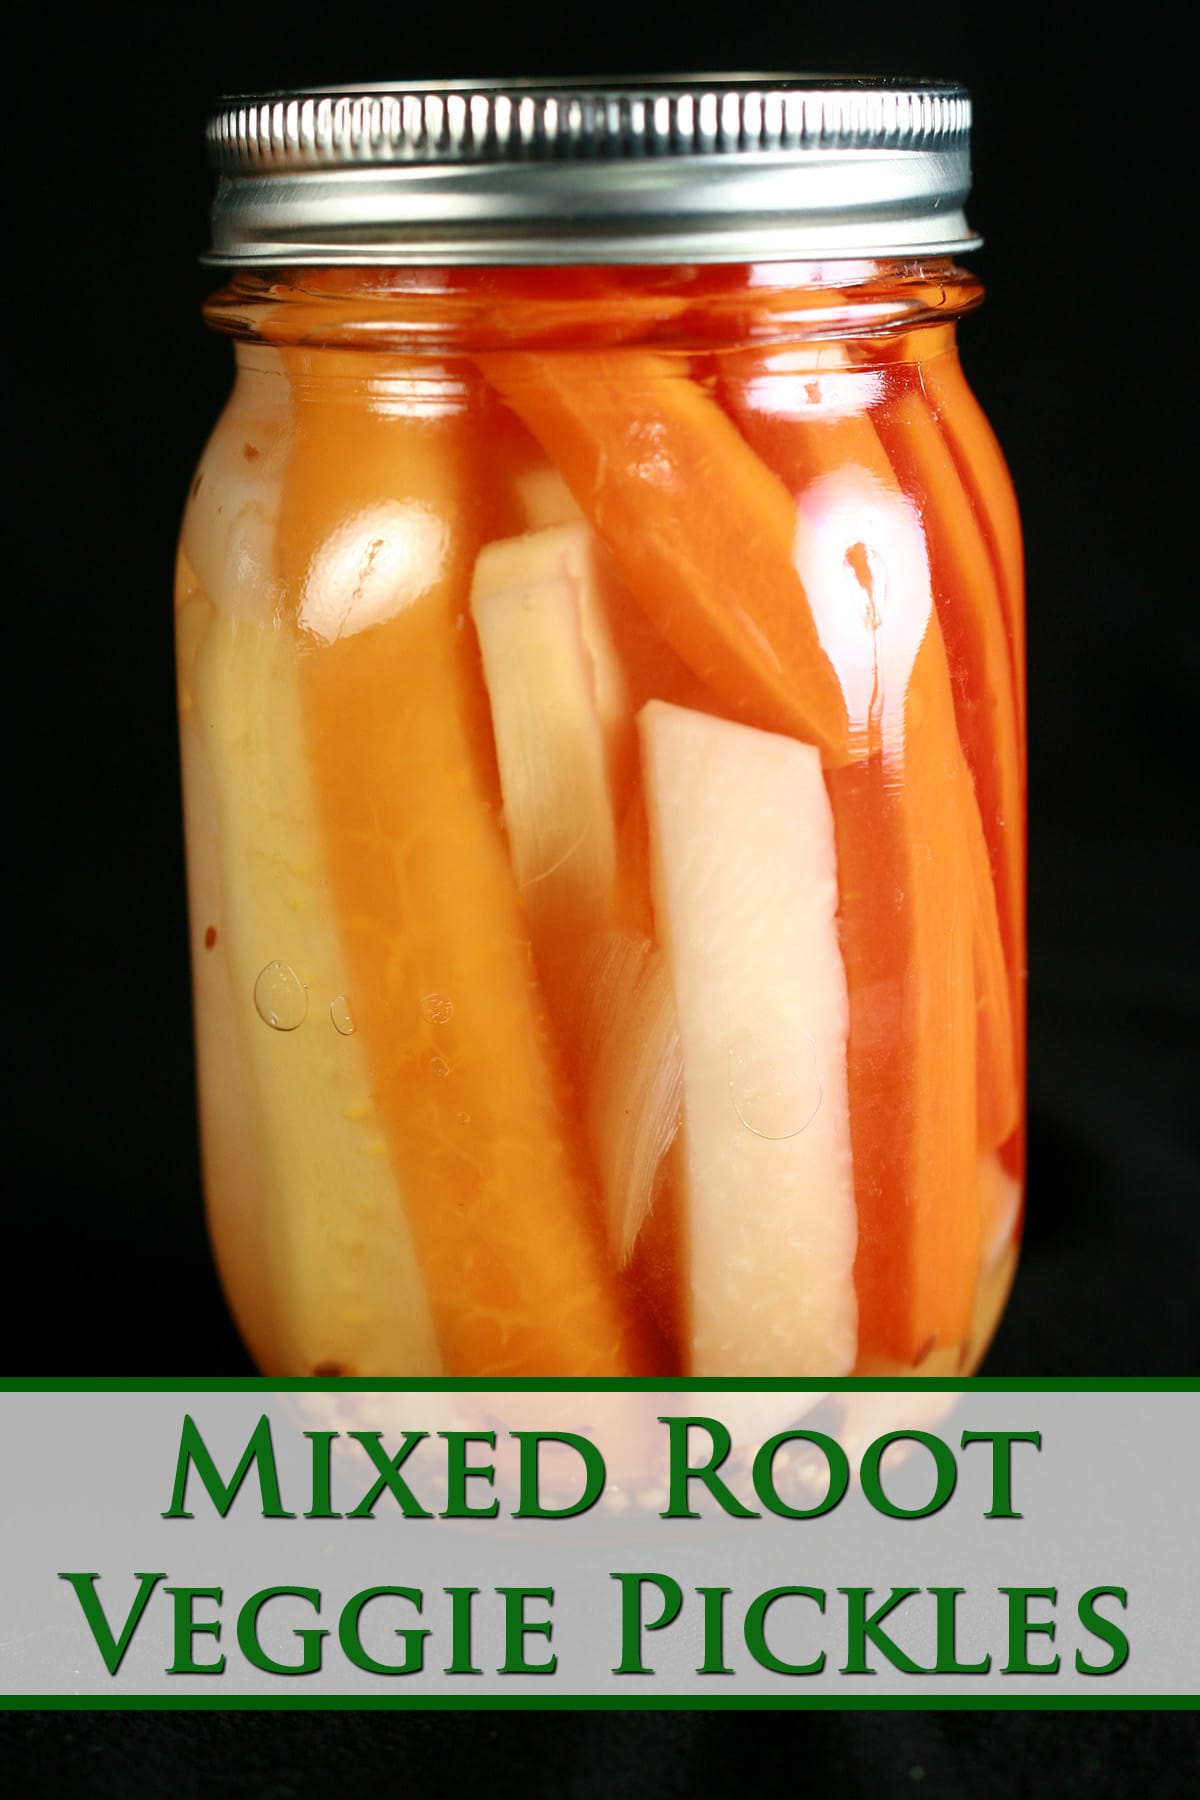 A jar of mixed root vegetable pickles. Spears of carrot, parsnip, and turnip are visible.